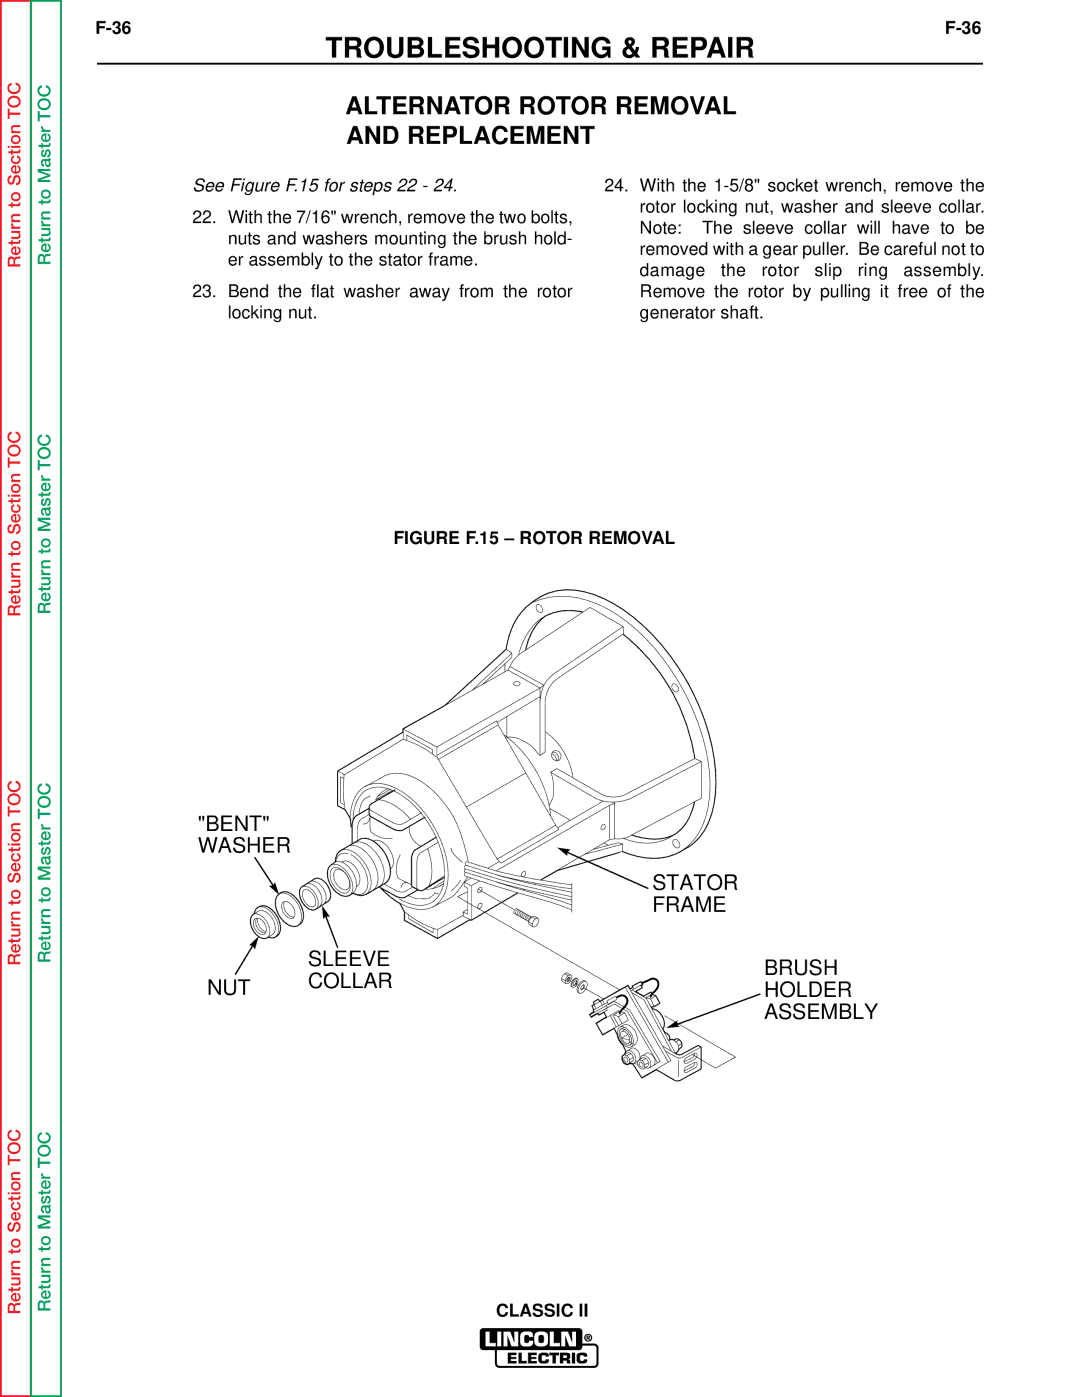 Lincoln Electric SVM125-A service manual Figure F.15 Rotor Removal 